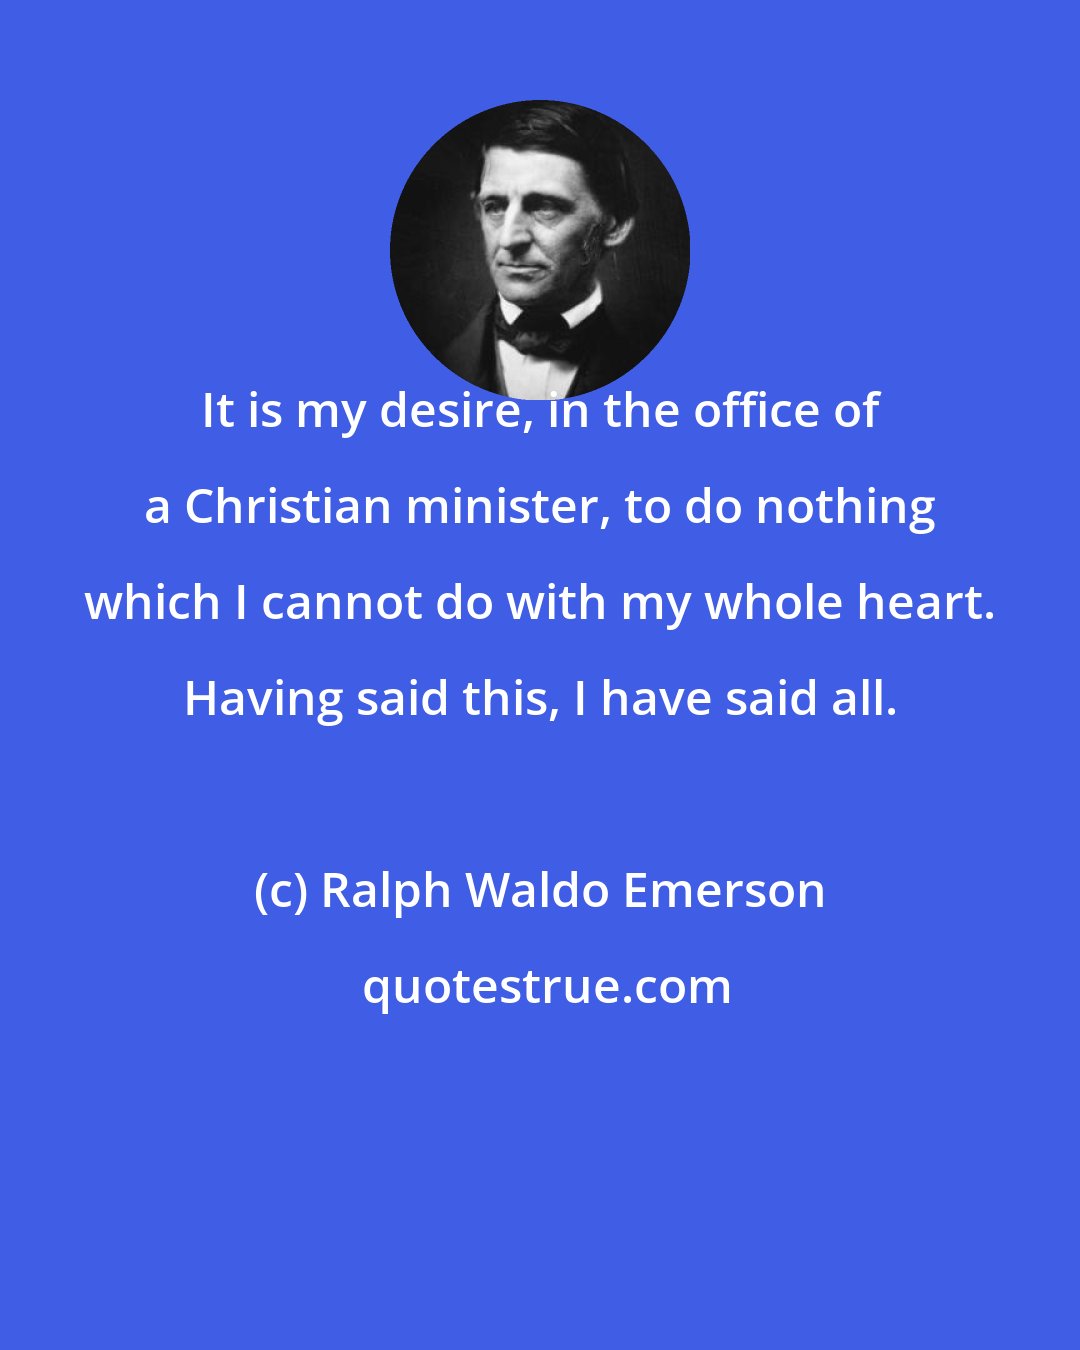 Ralph Waldo Emerson: It is my desire, in the office of a Christian minister, to do nothing which I cannot do with my whole heart. Having said this, I have said all.